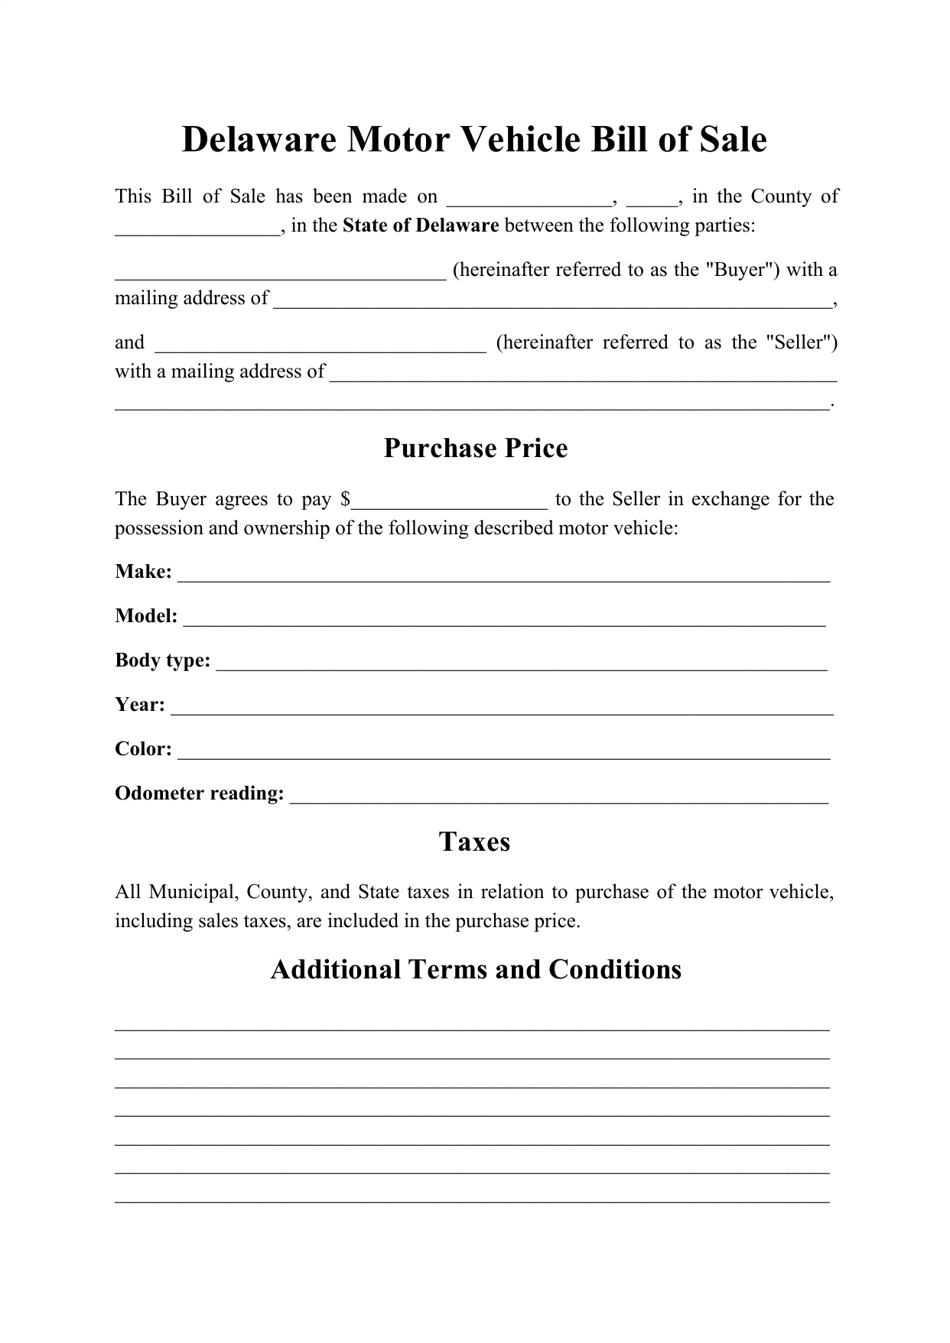 Delaware Motor Vehicle Bill of Sale Form Fill Out Sign Online and